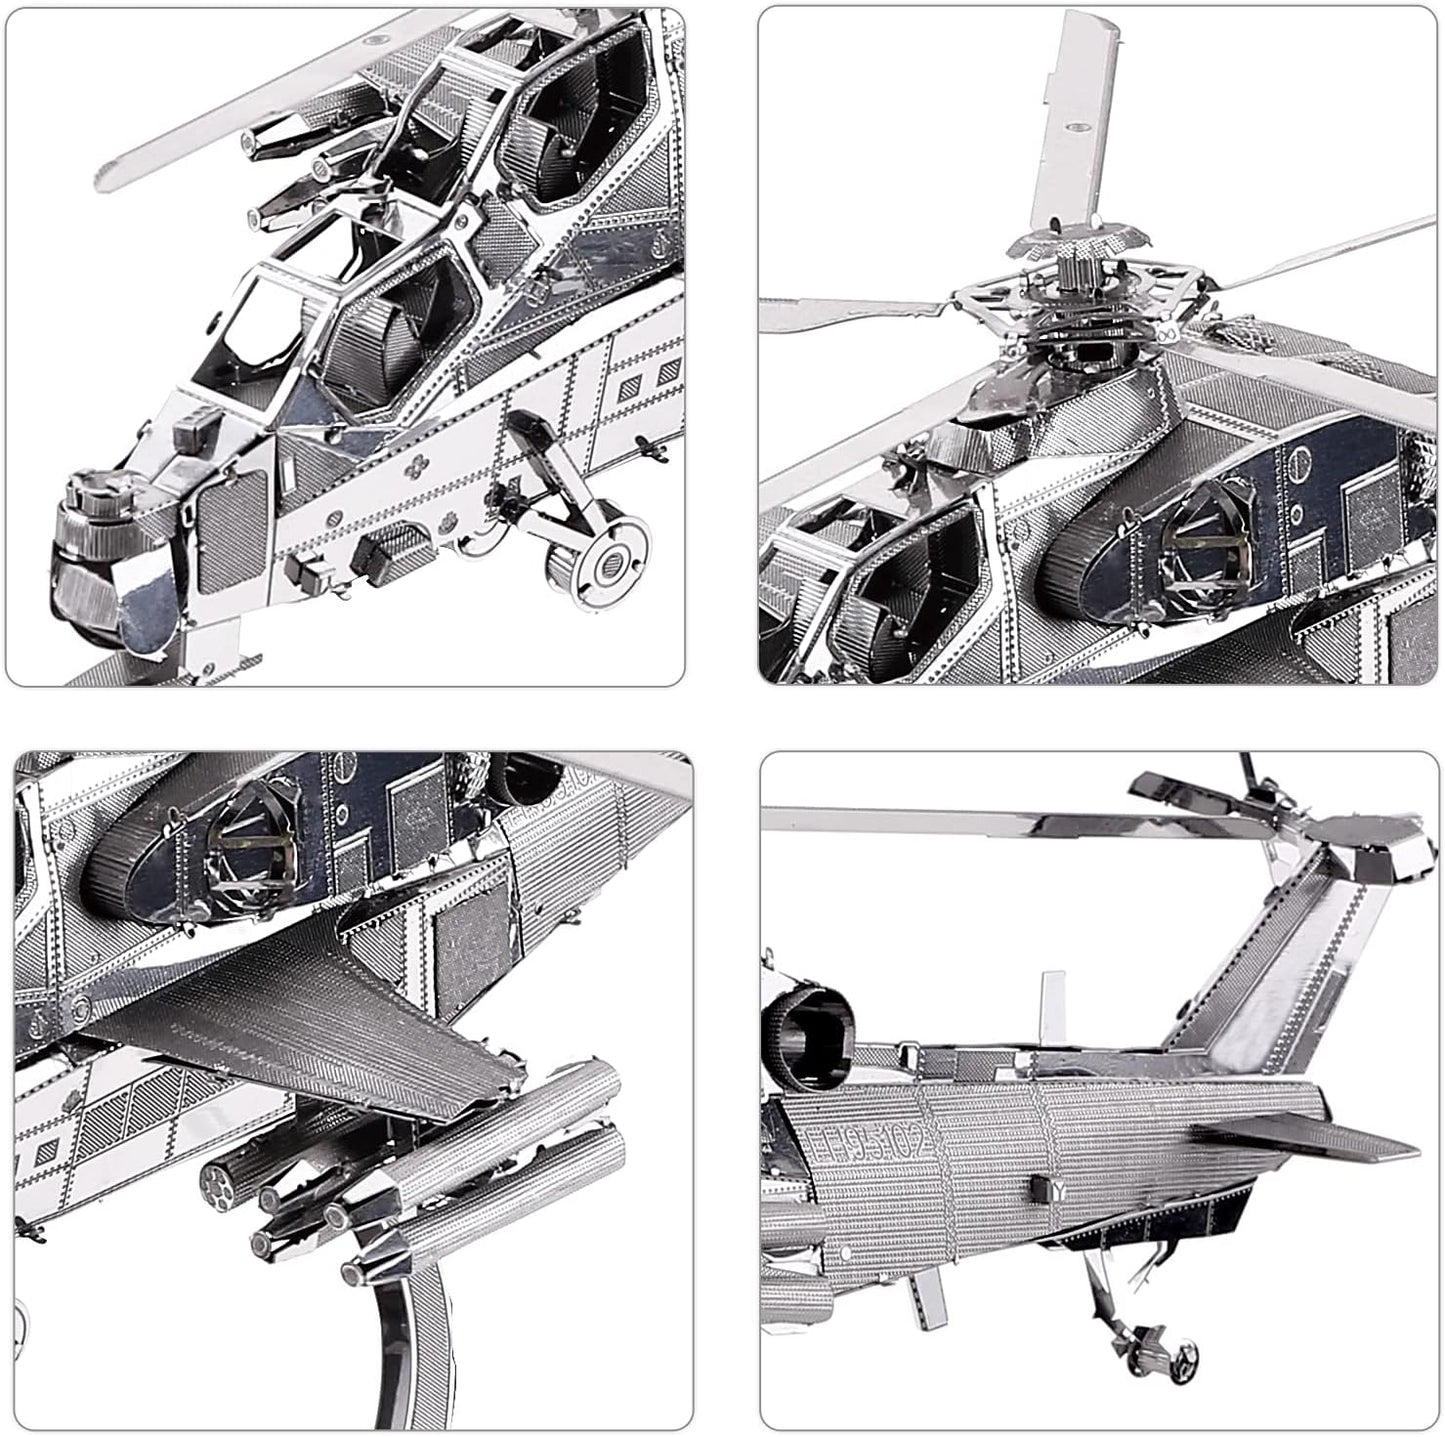 Piececool Metal Earth 10 Helicopter Airplane Models, 122 Pcs